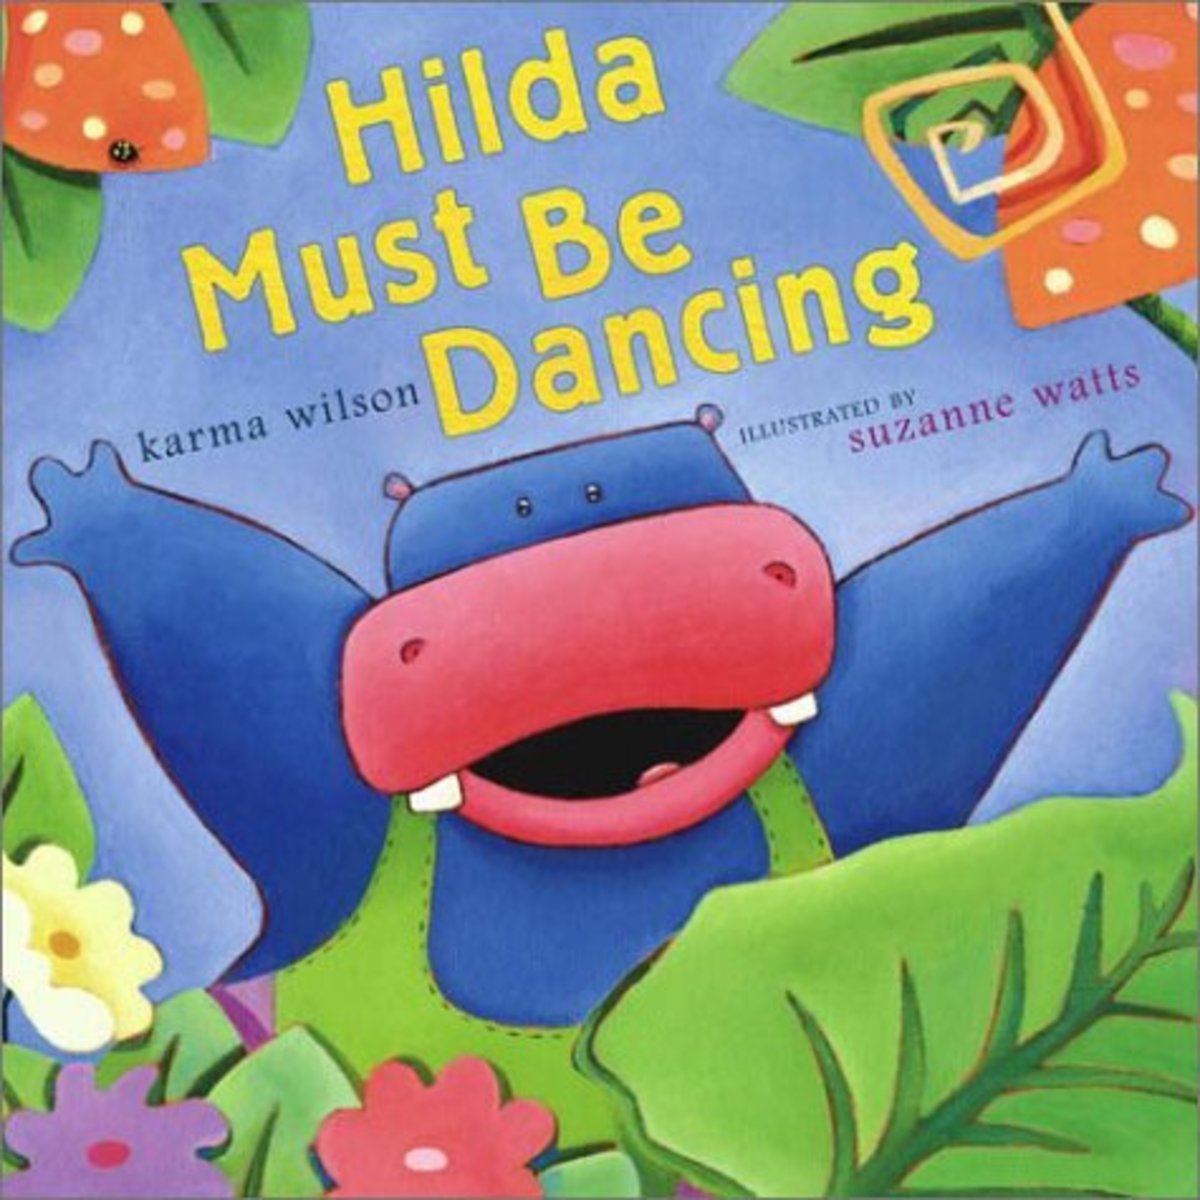 Hilda Must Be Dancing by Karma Wilson Children's Book Review and Preschool Lesson Plan